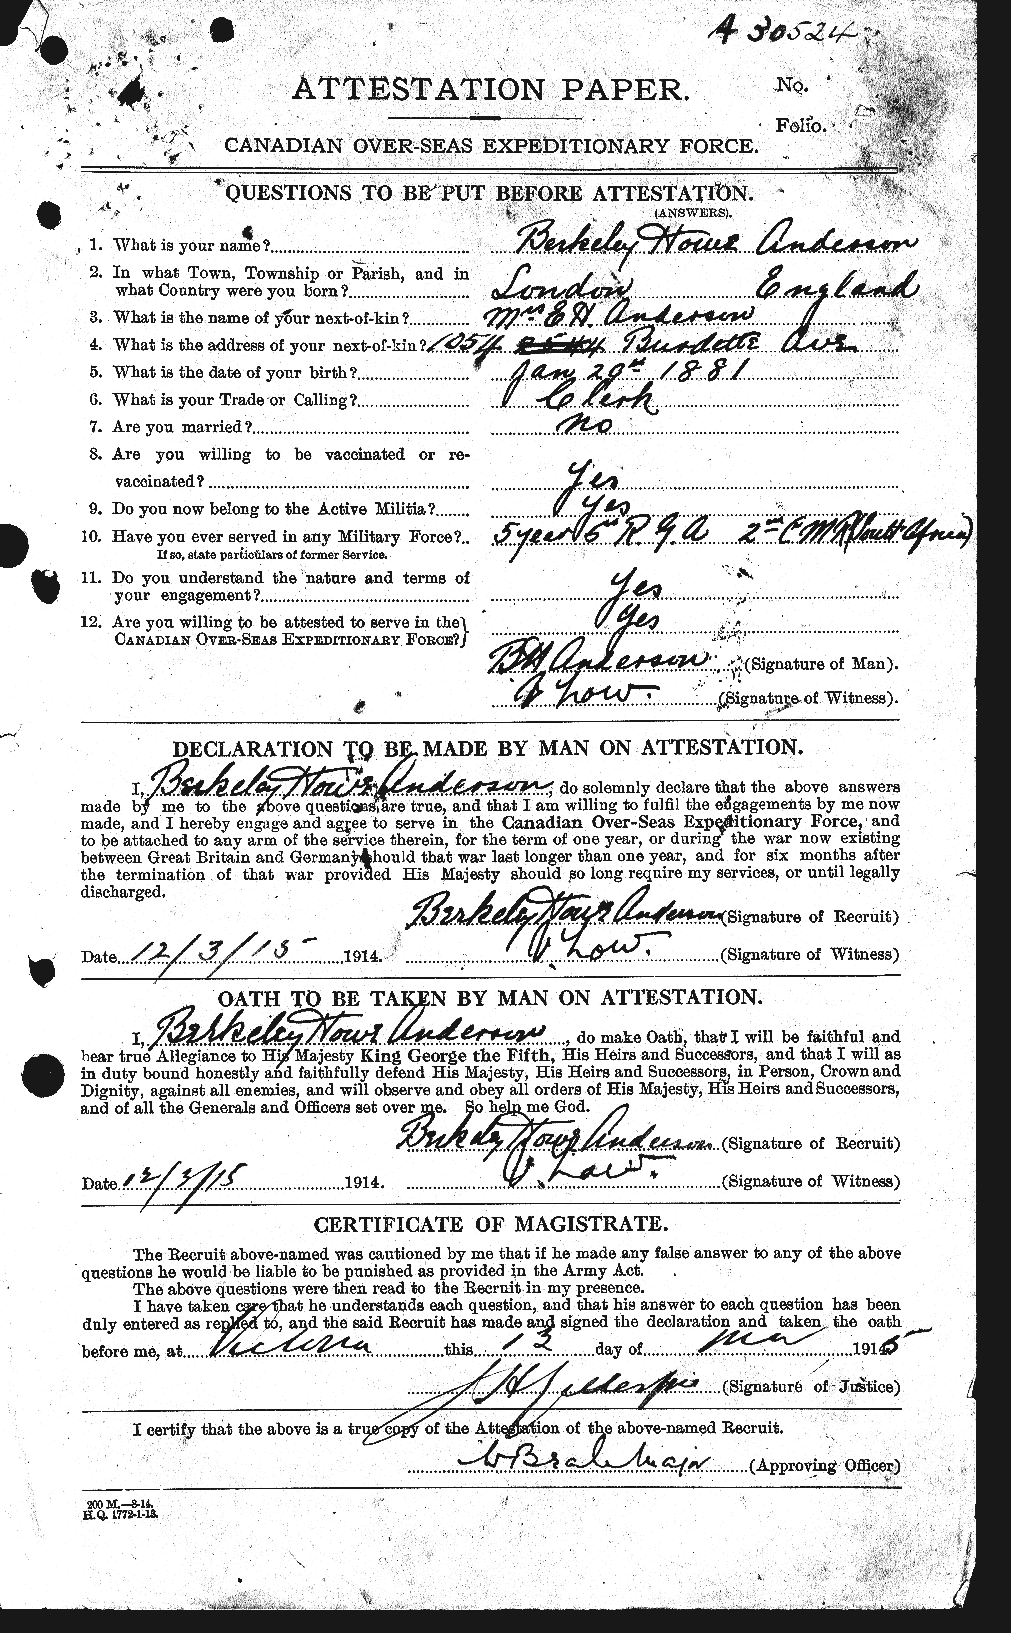 Personnel Records of the First World War - CEF 209318a